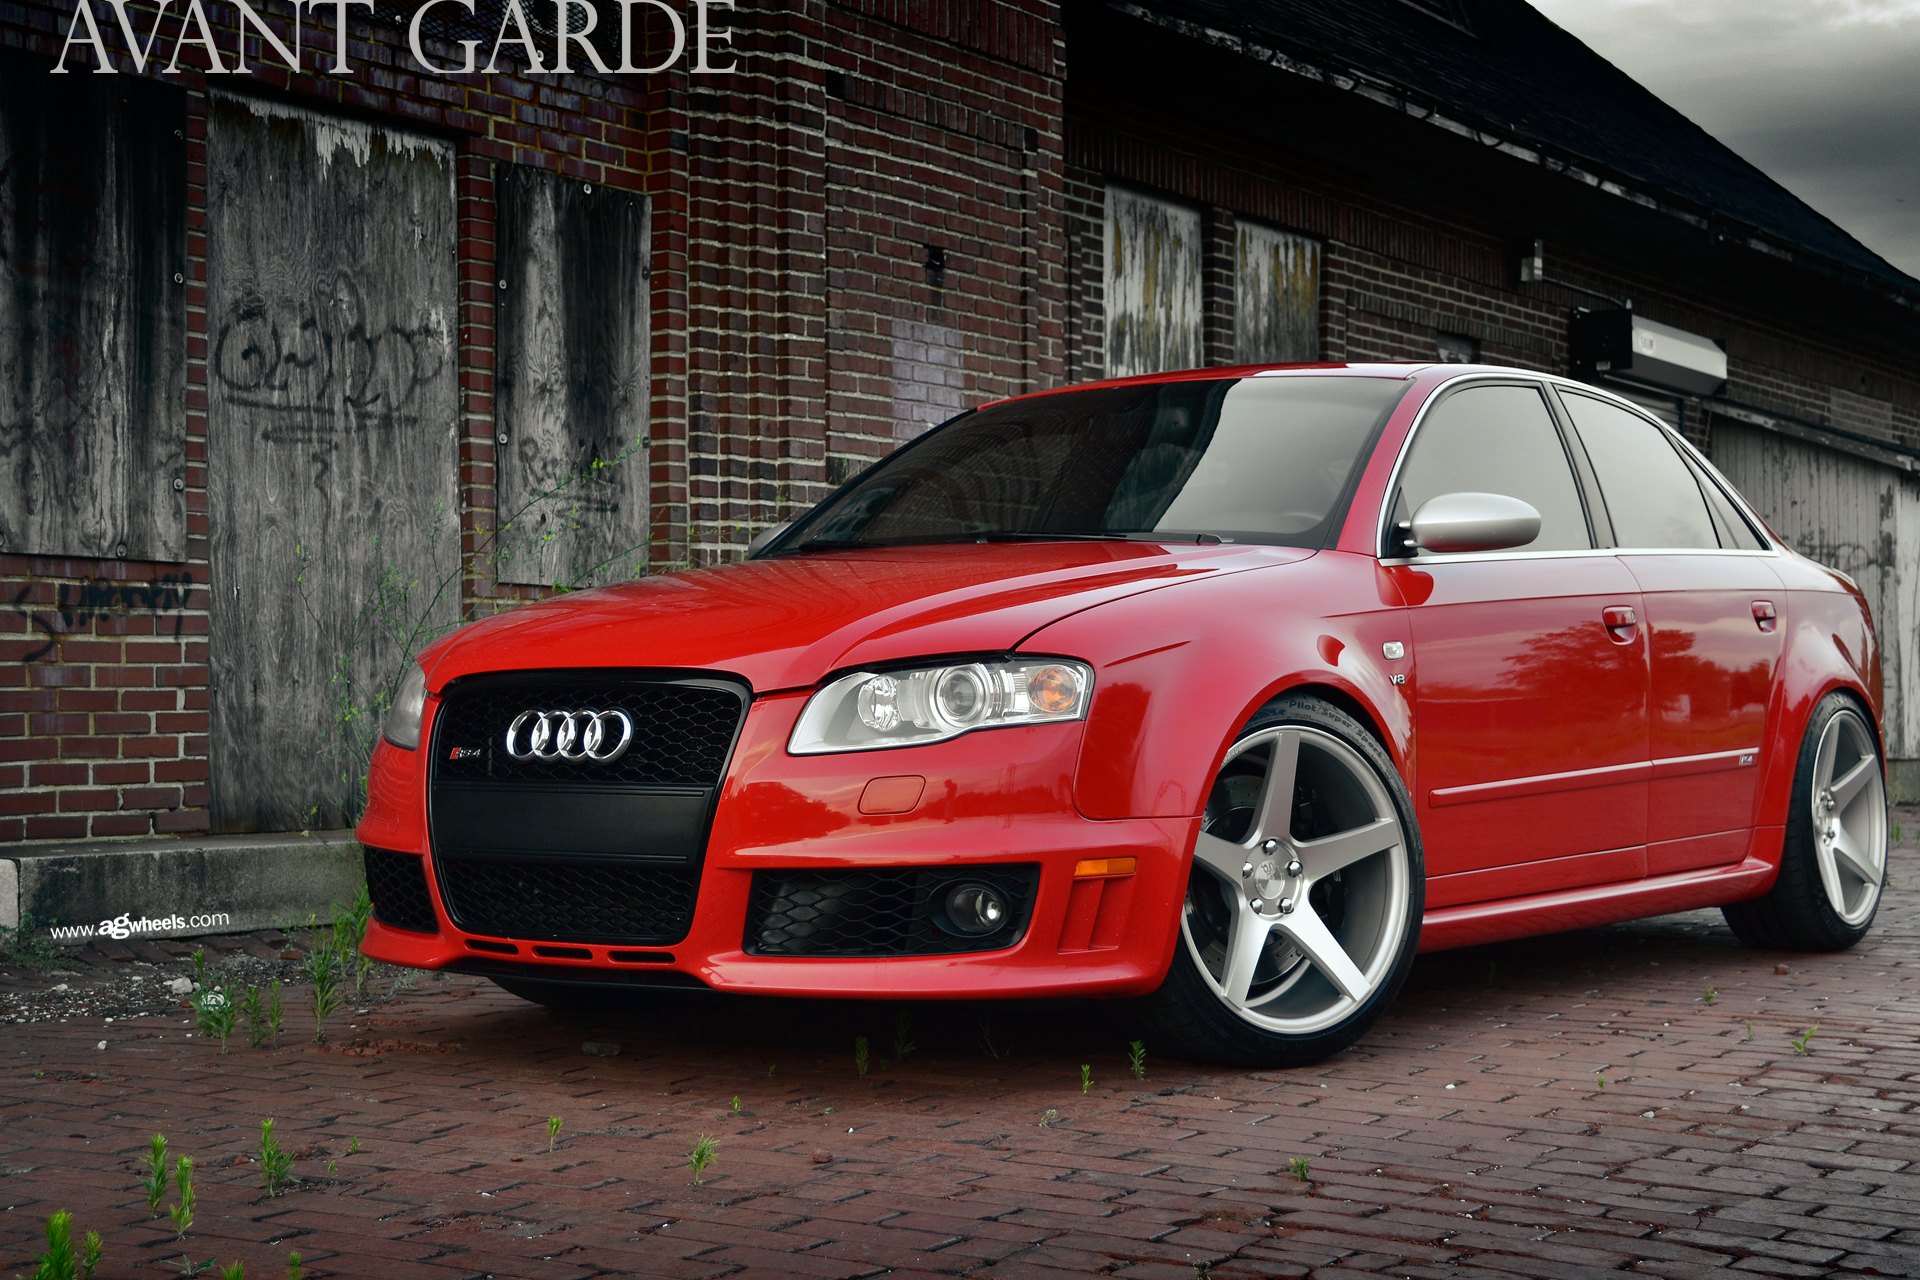 Front Bumper with Fog Lights on Red Audi S4 - Photo by Avant Garde Wheels